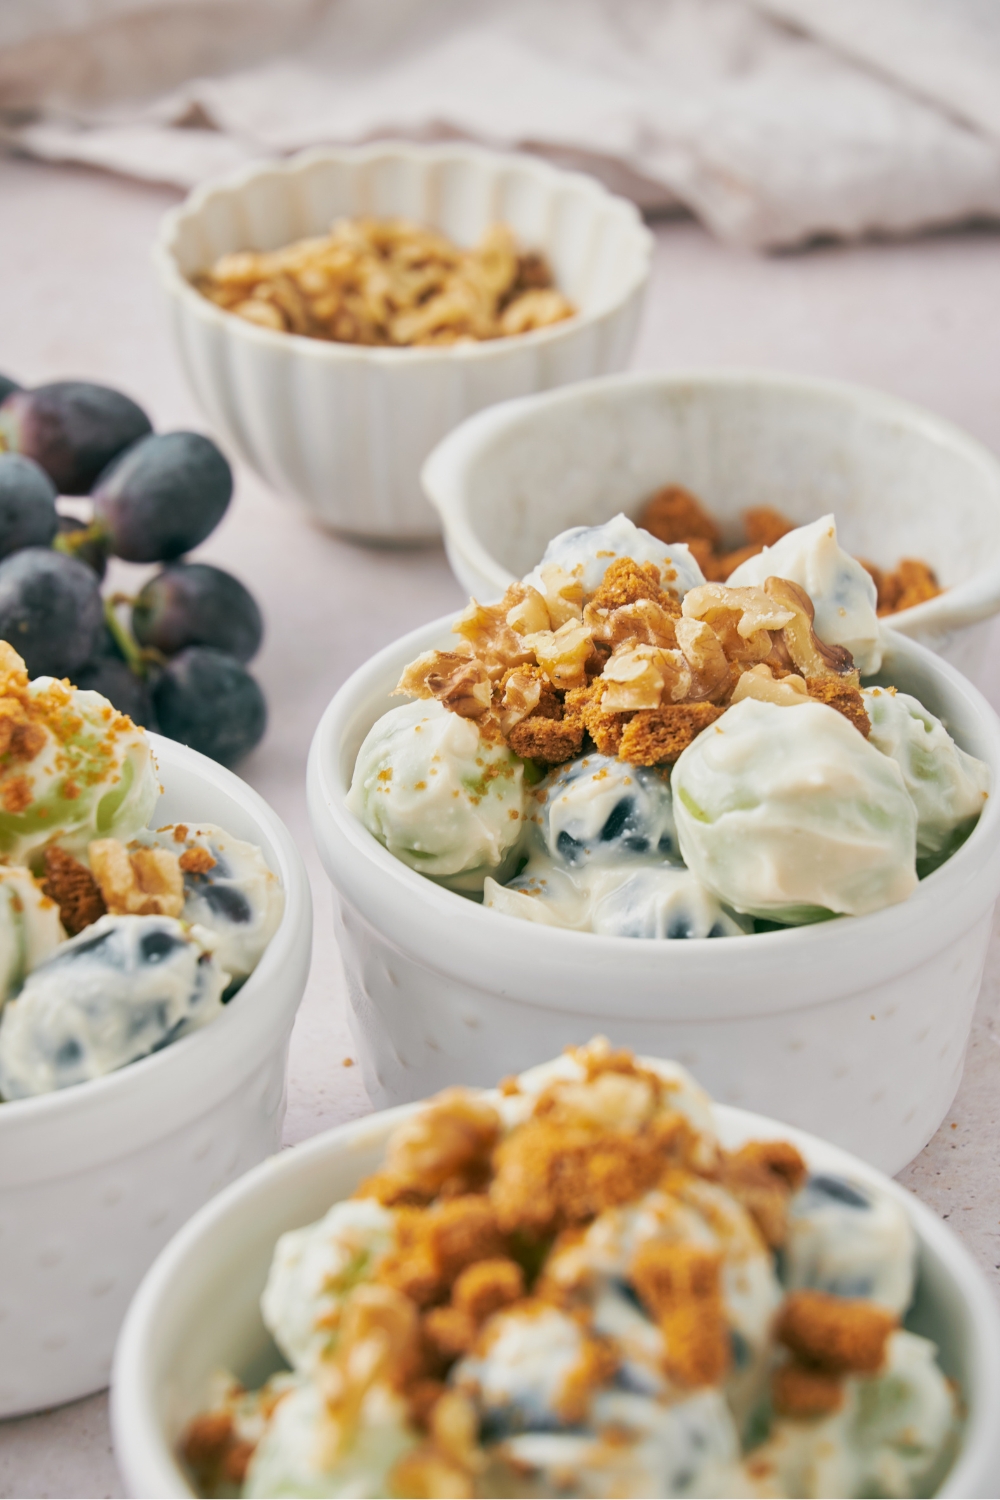 A few small bowls with grape salad topped with chopped nuts and crumbled spiced cookies.